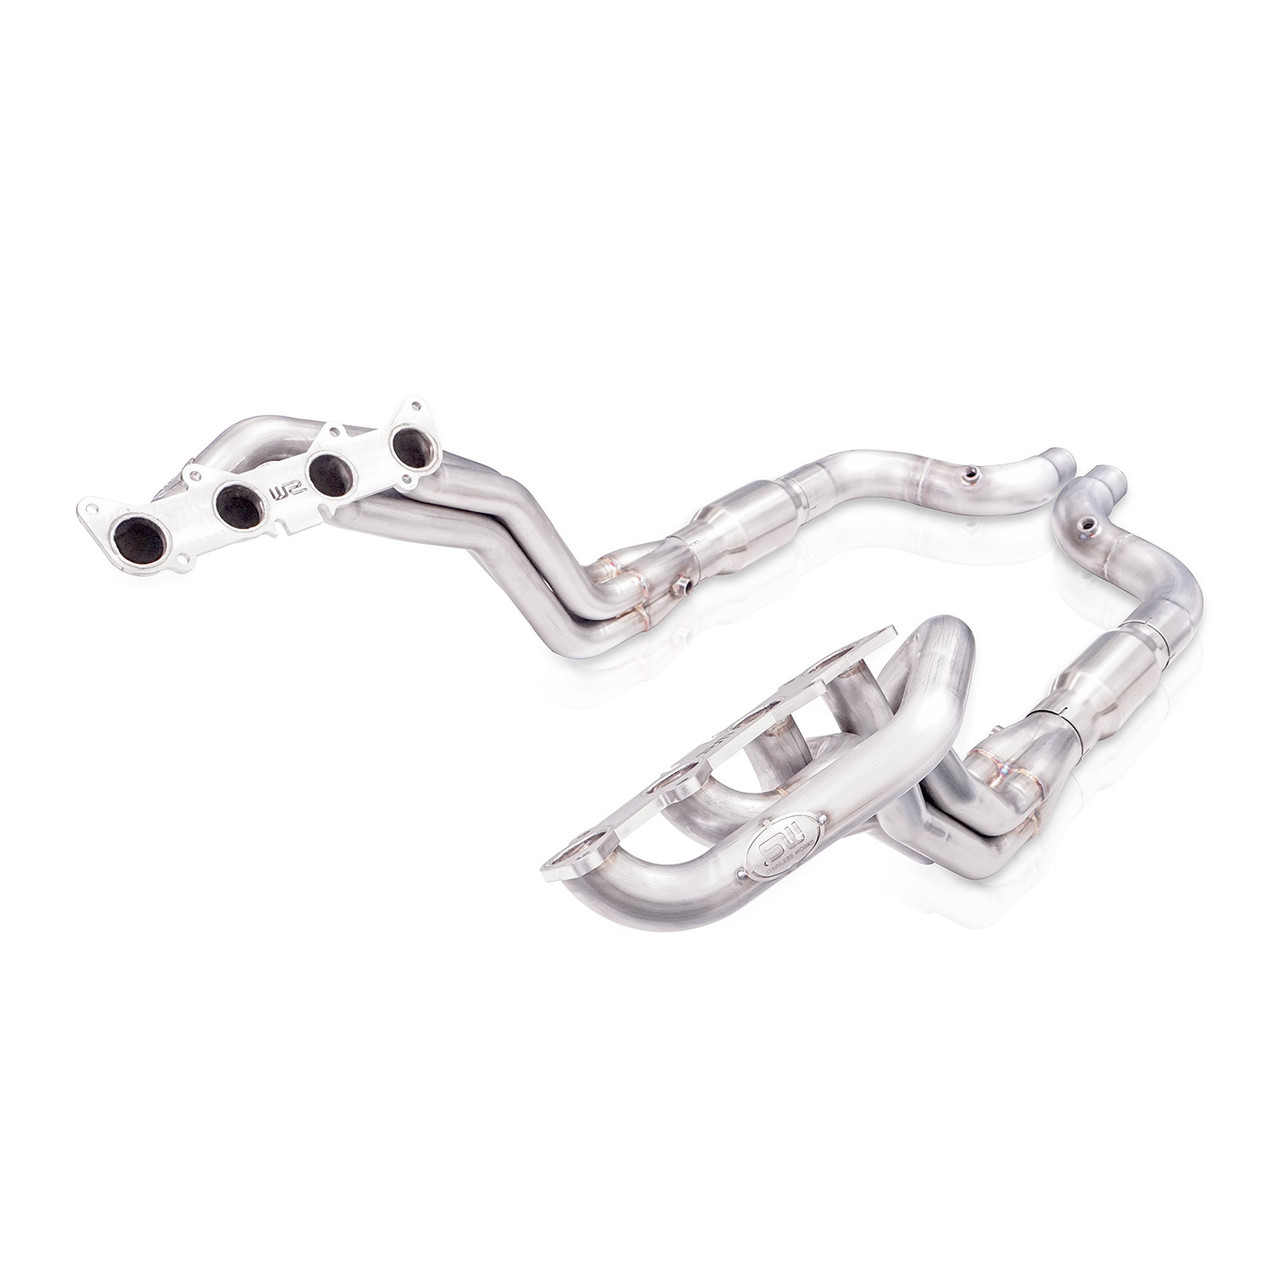 Stainless Power 1 7/8" Long Tube Headers w. High Flow Cats / Aftermarket Connect - S550 Mustang GT